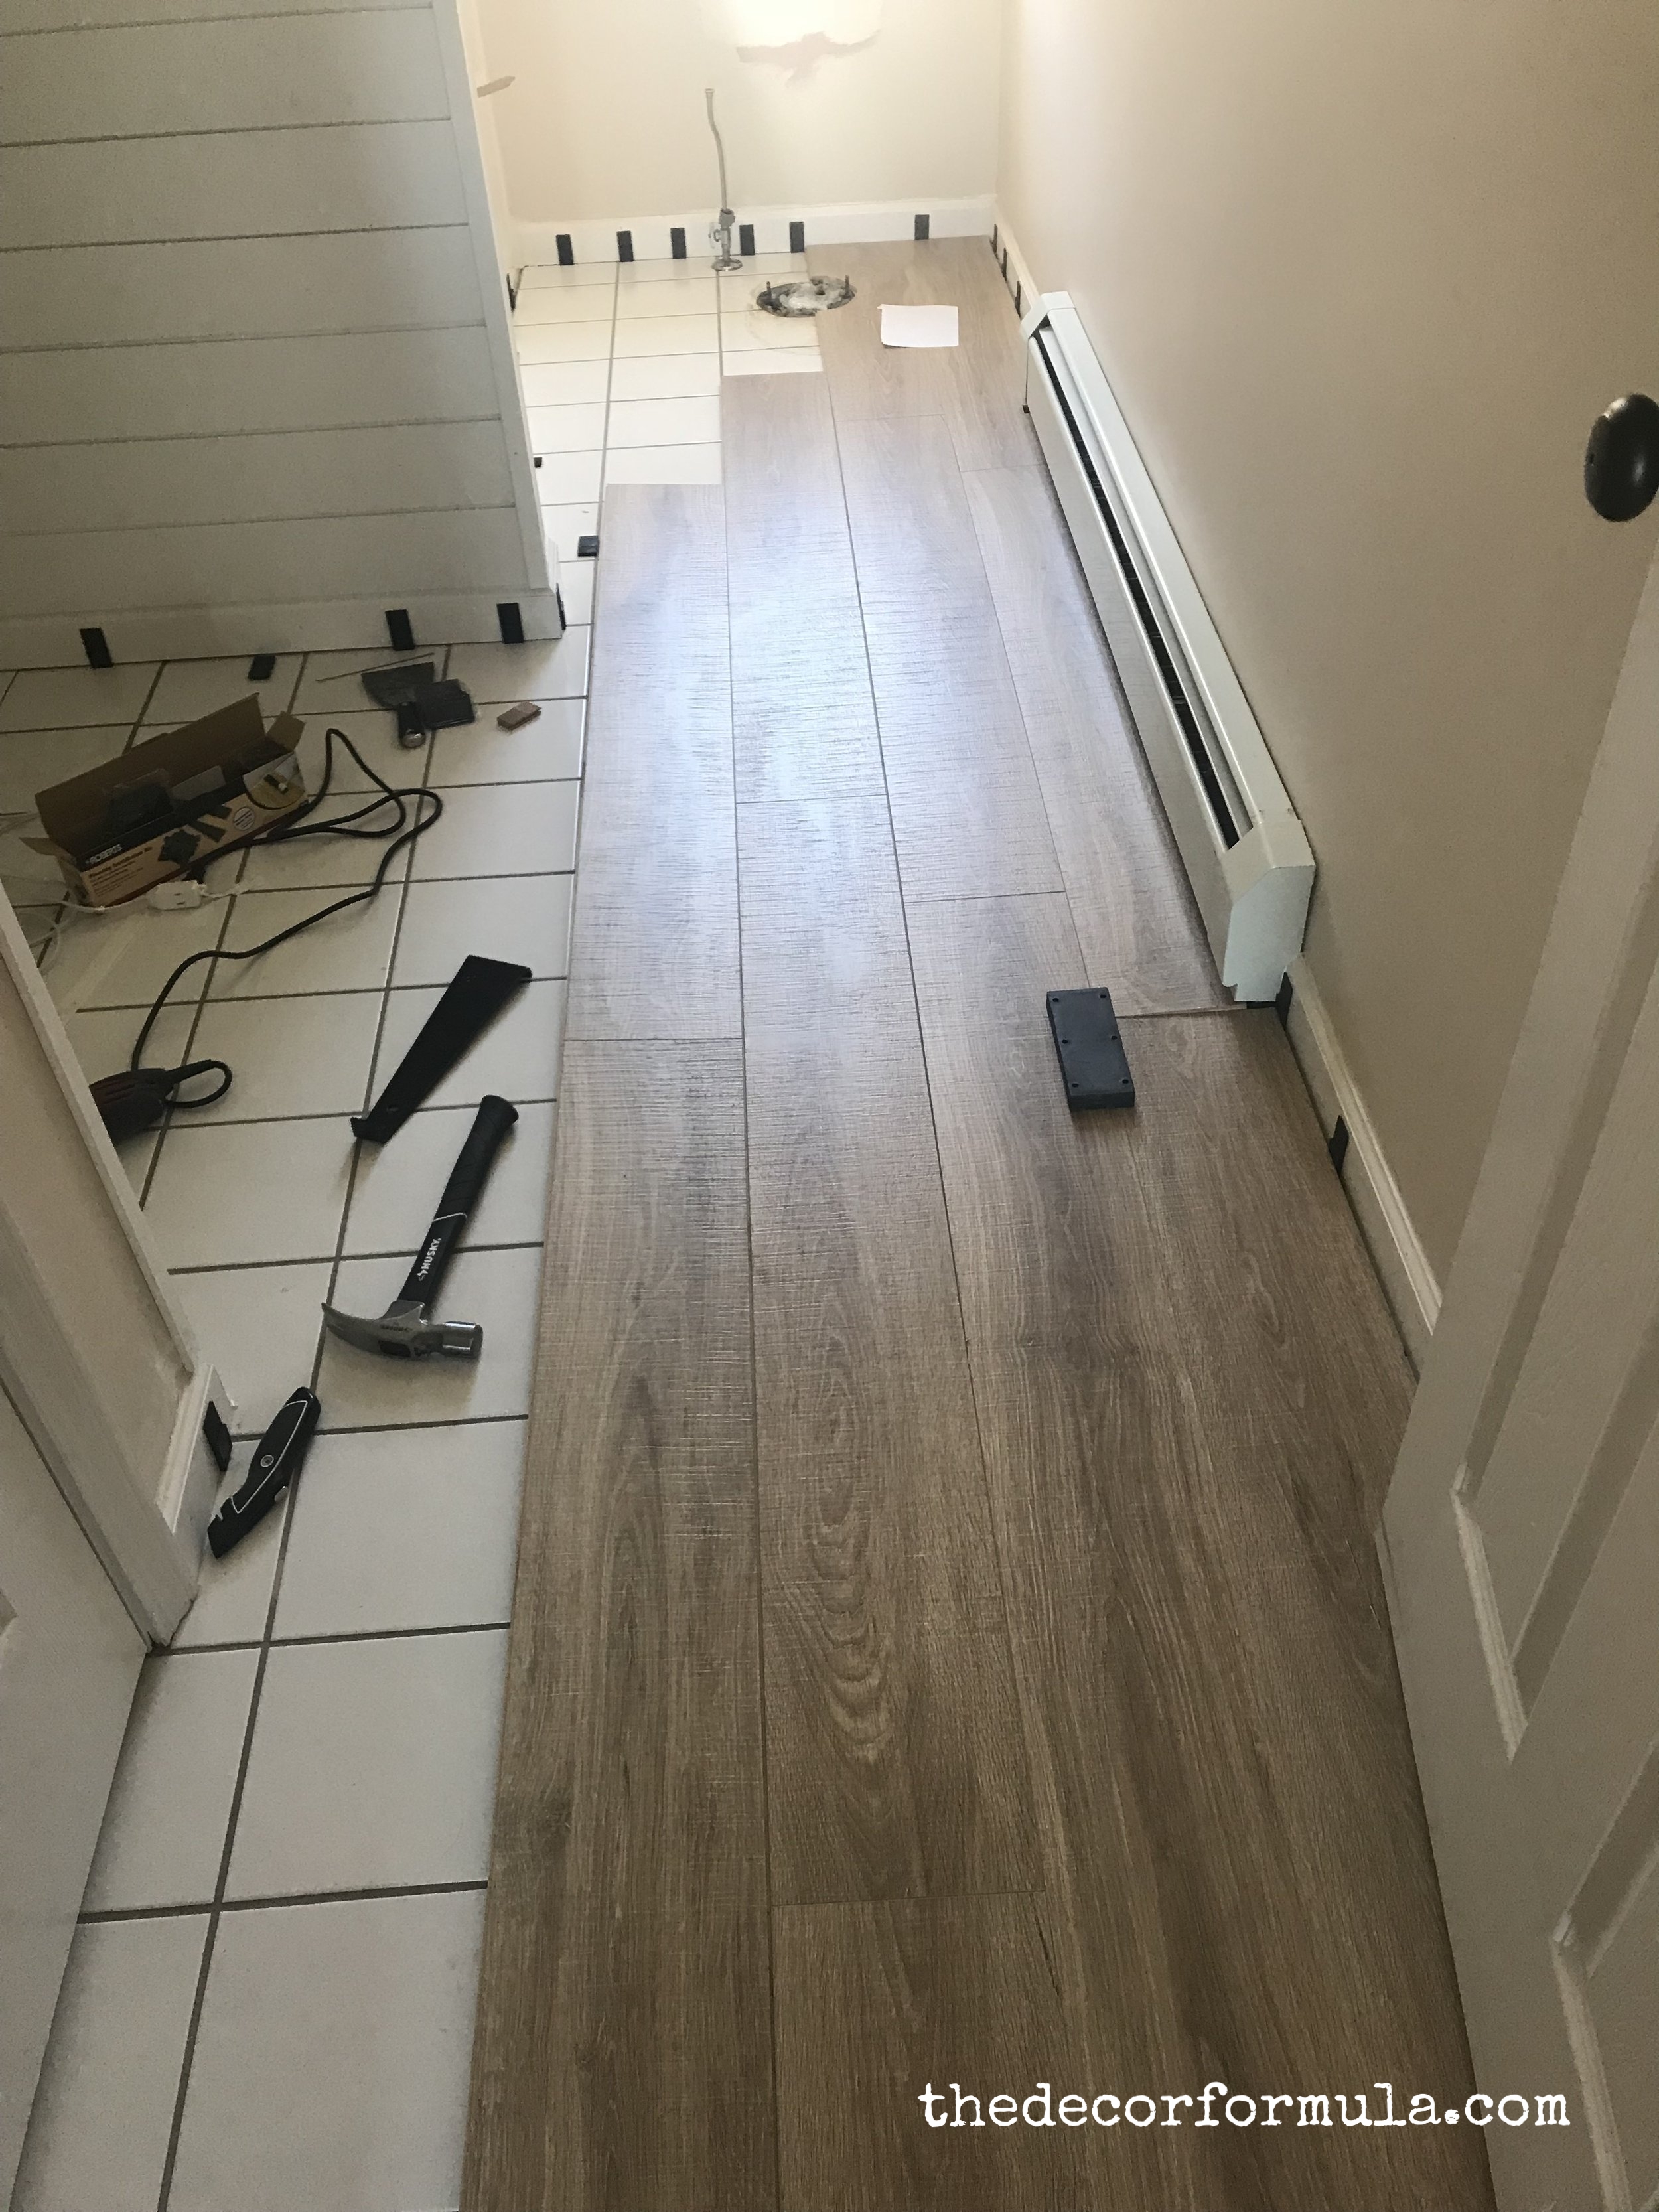 Ideas For Covering Up Tile Floors, Can You Lay Laminate Wood Flooring Over Tile